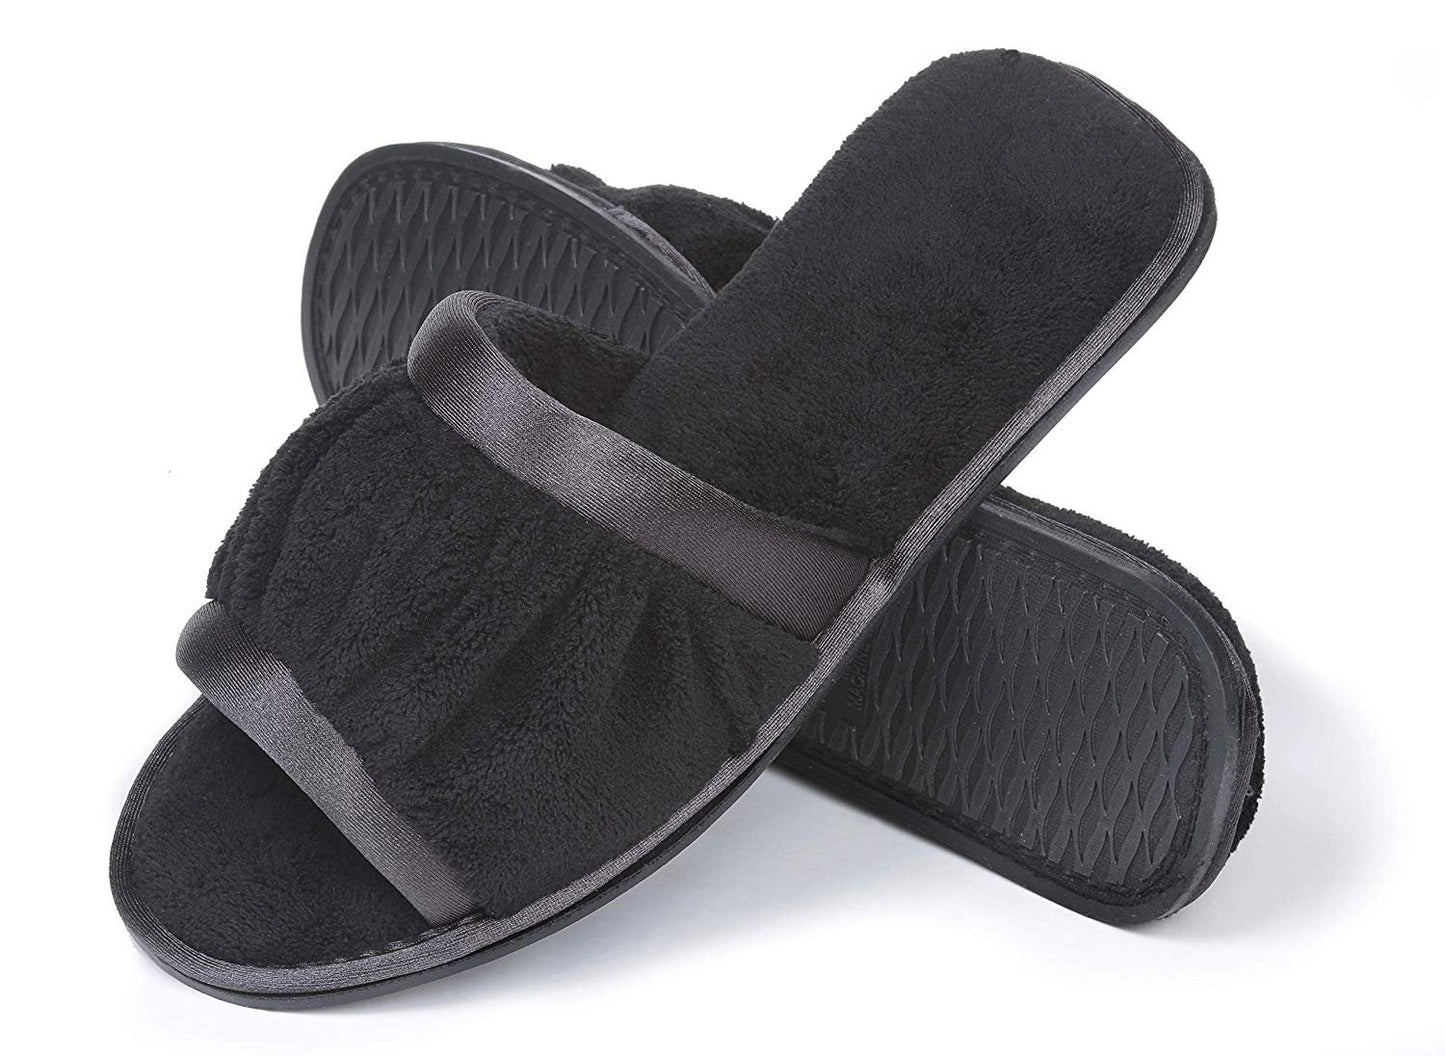 Roxoni Women's Open Toe Slide Slipper ; Ideal Terry Cloth House Shoe for Indoor and Outdoor